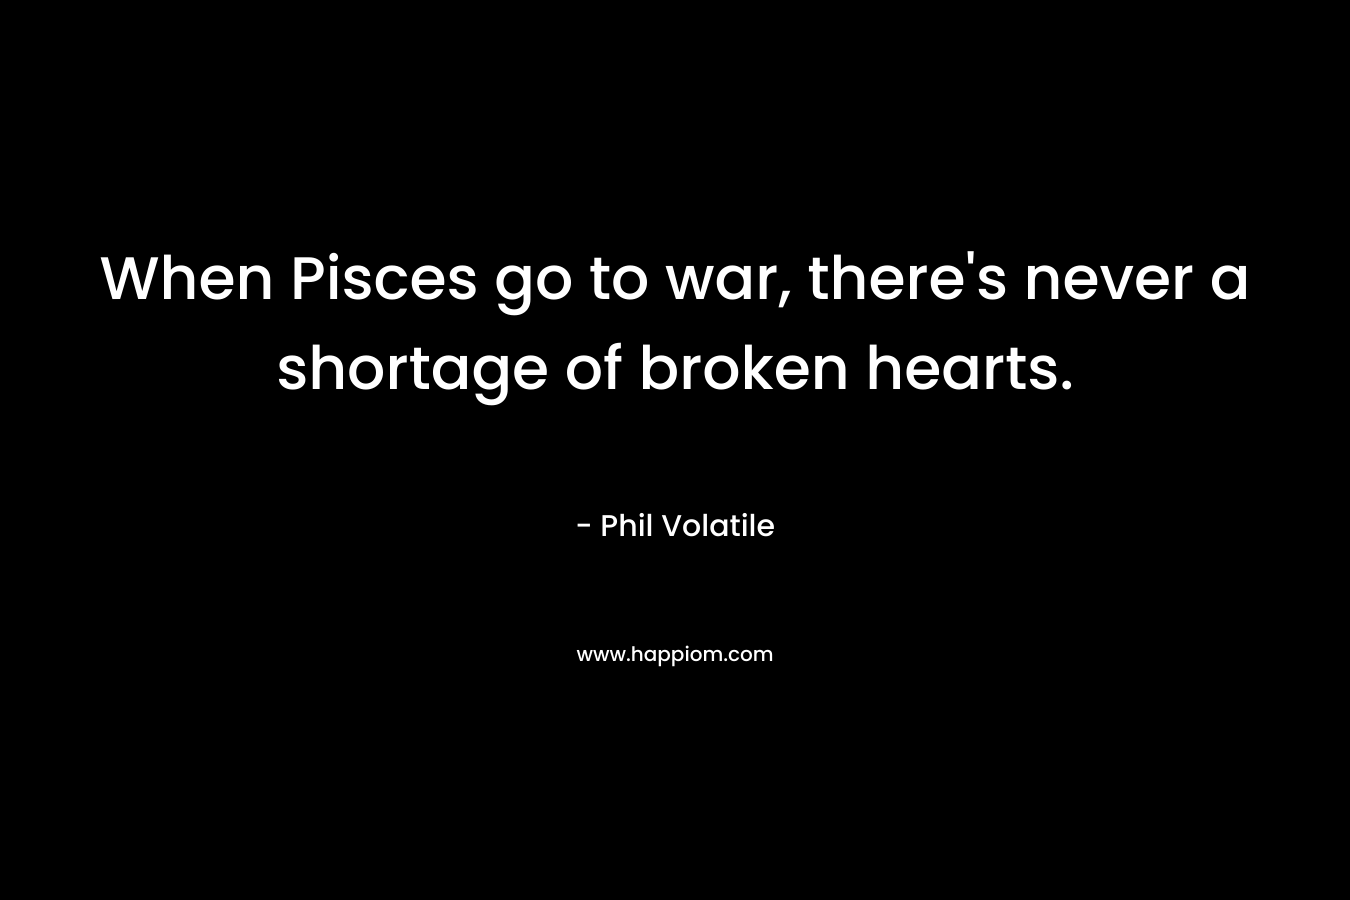 When Pisces go to war, there’s never a shortage of broken hearts. – Phil Volatile